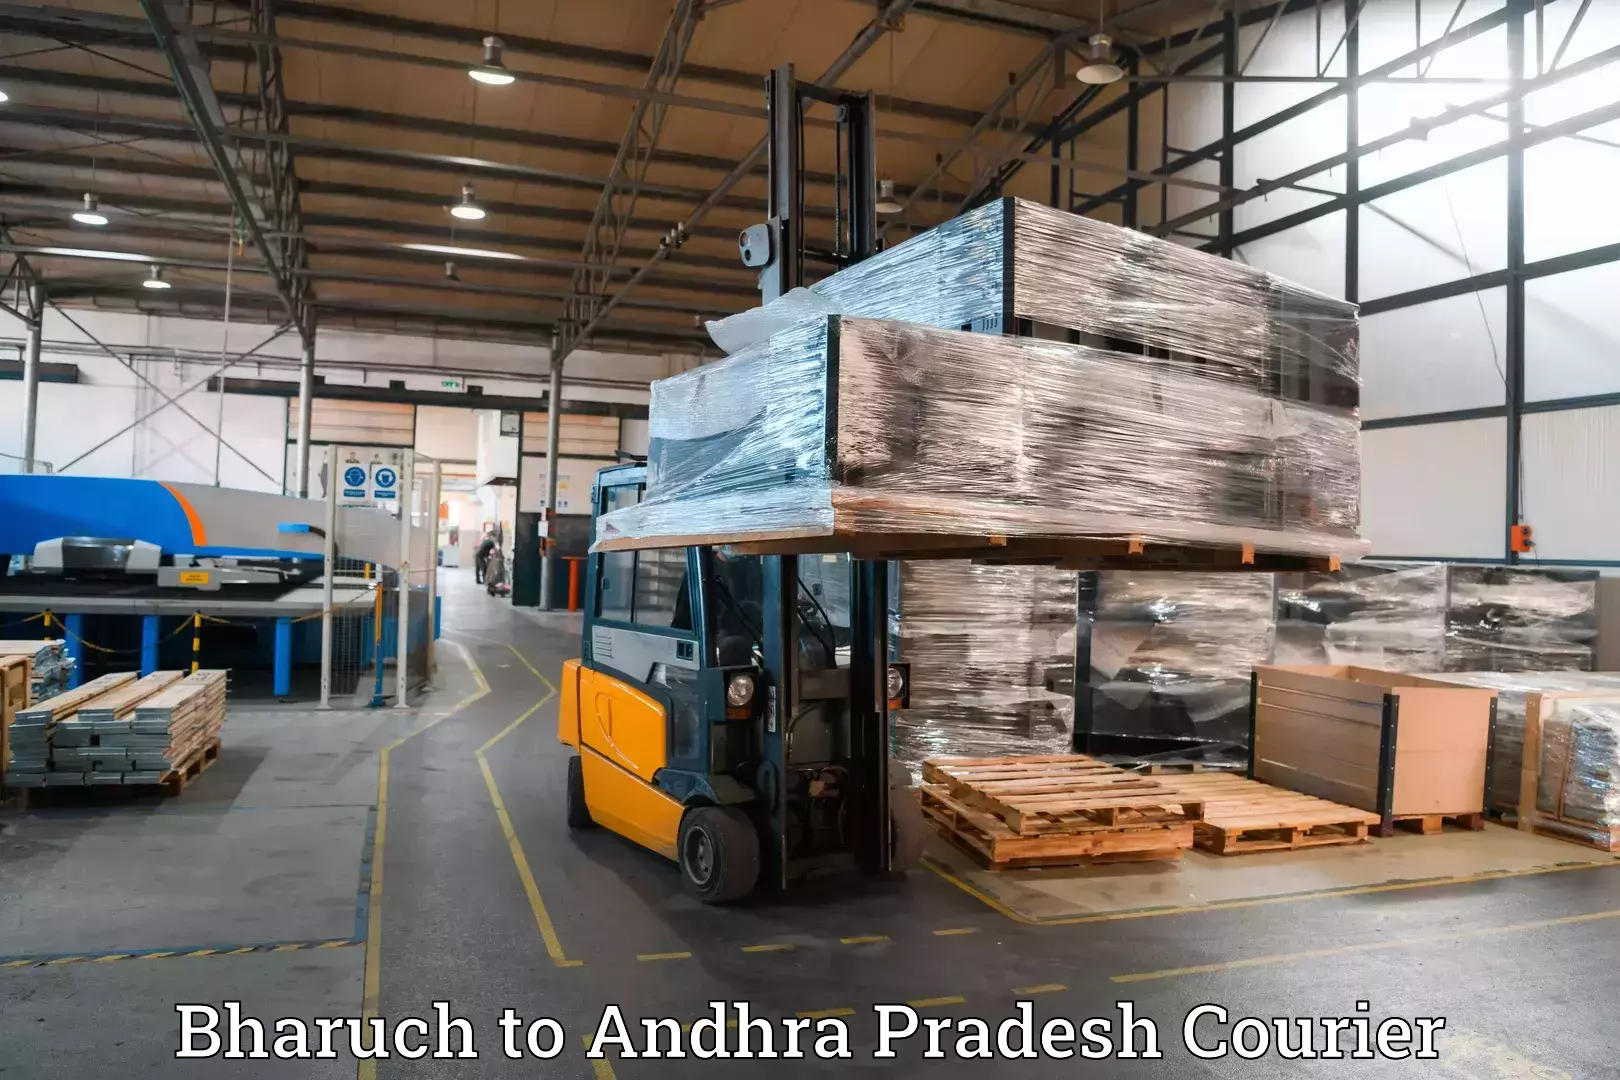 Baggage shipping experts Bharuch to Kondapi